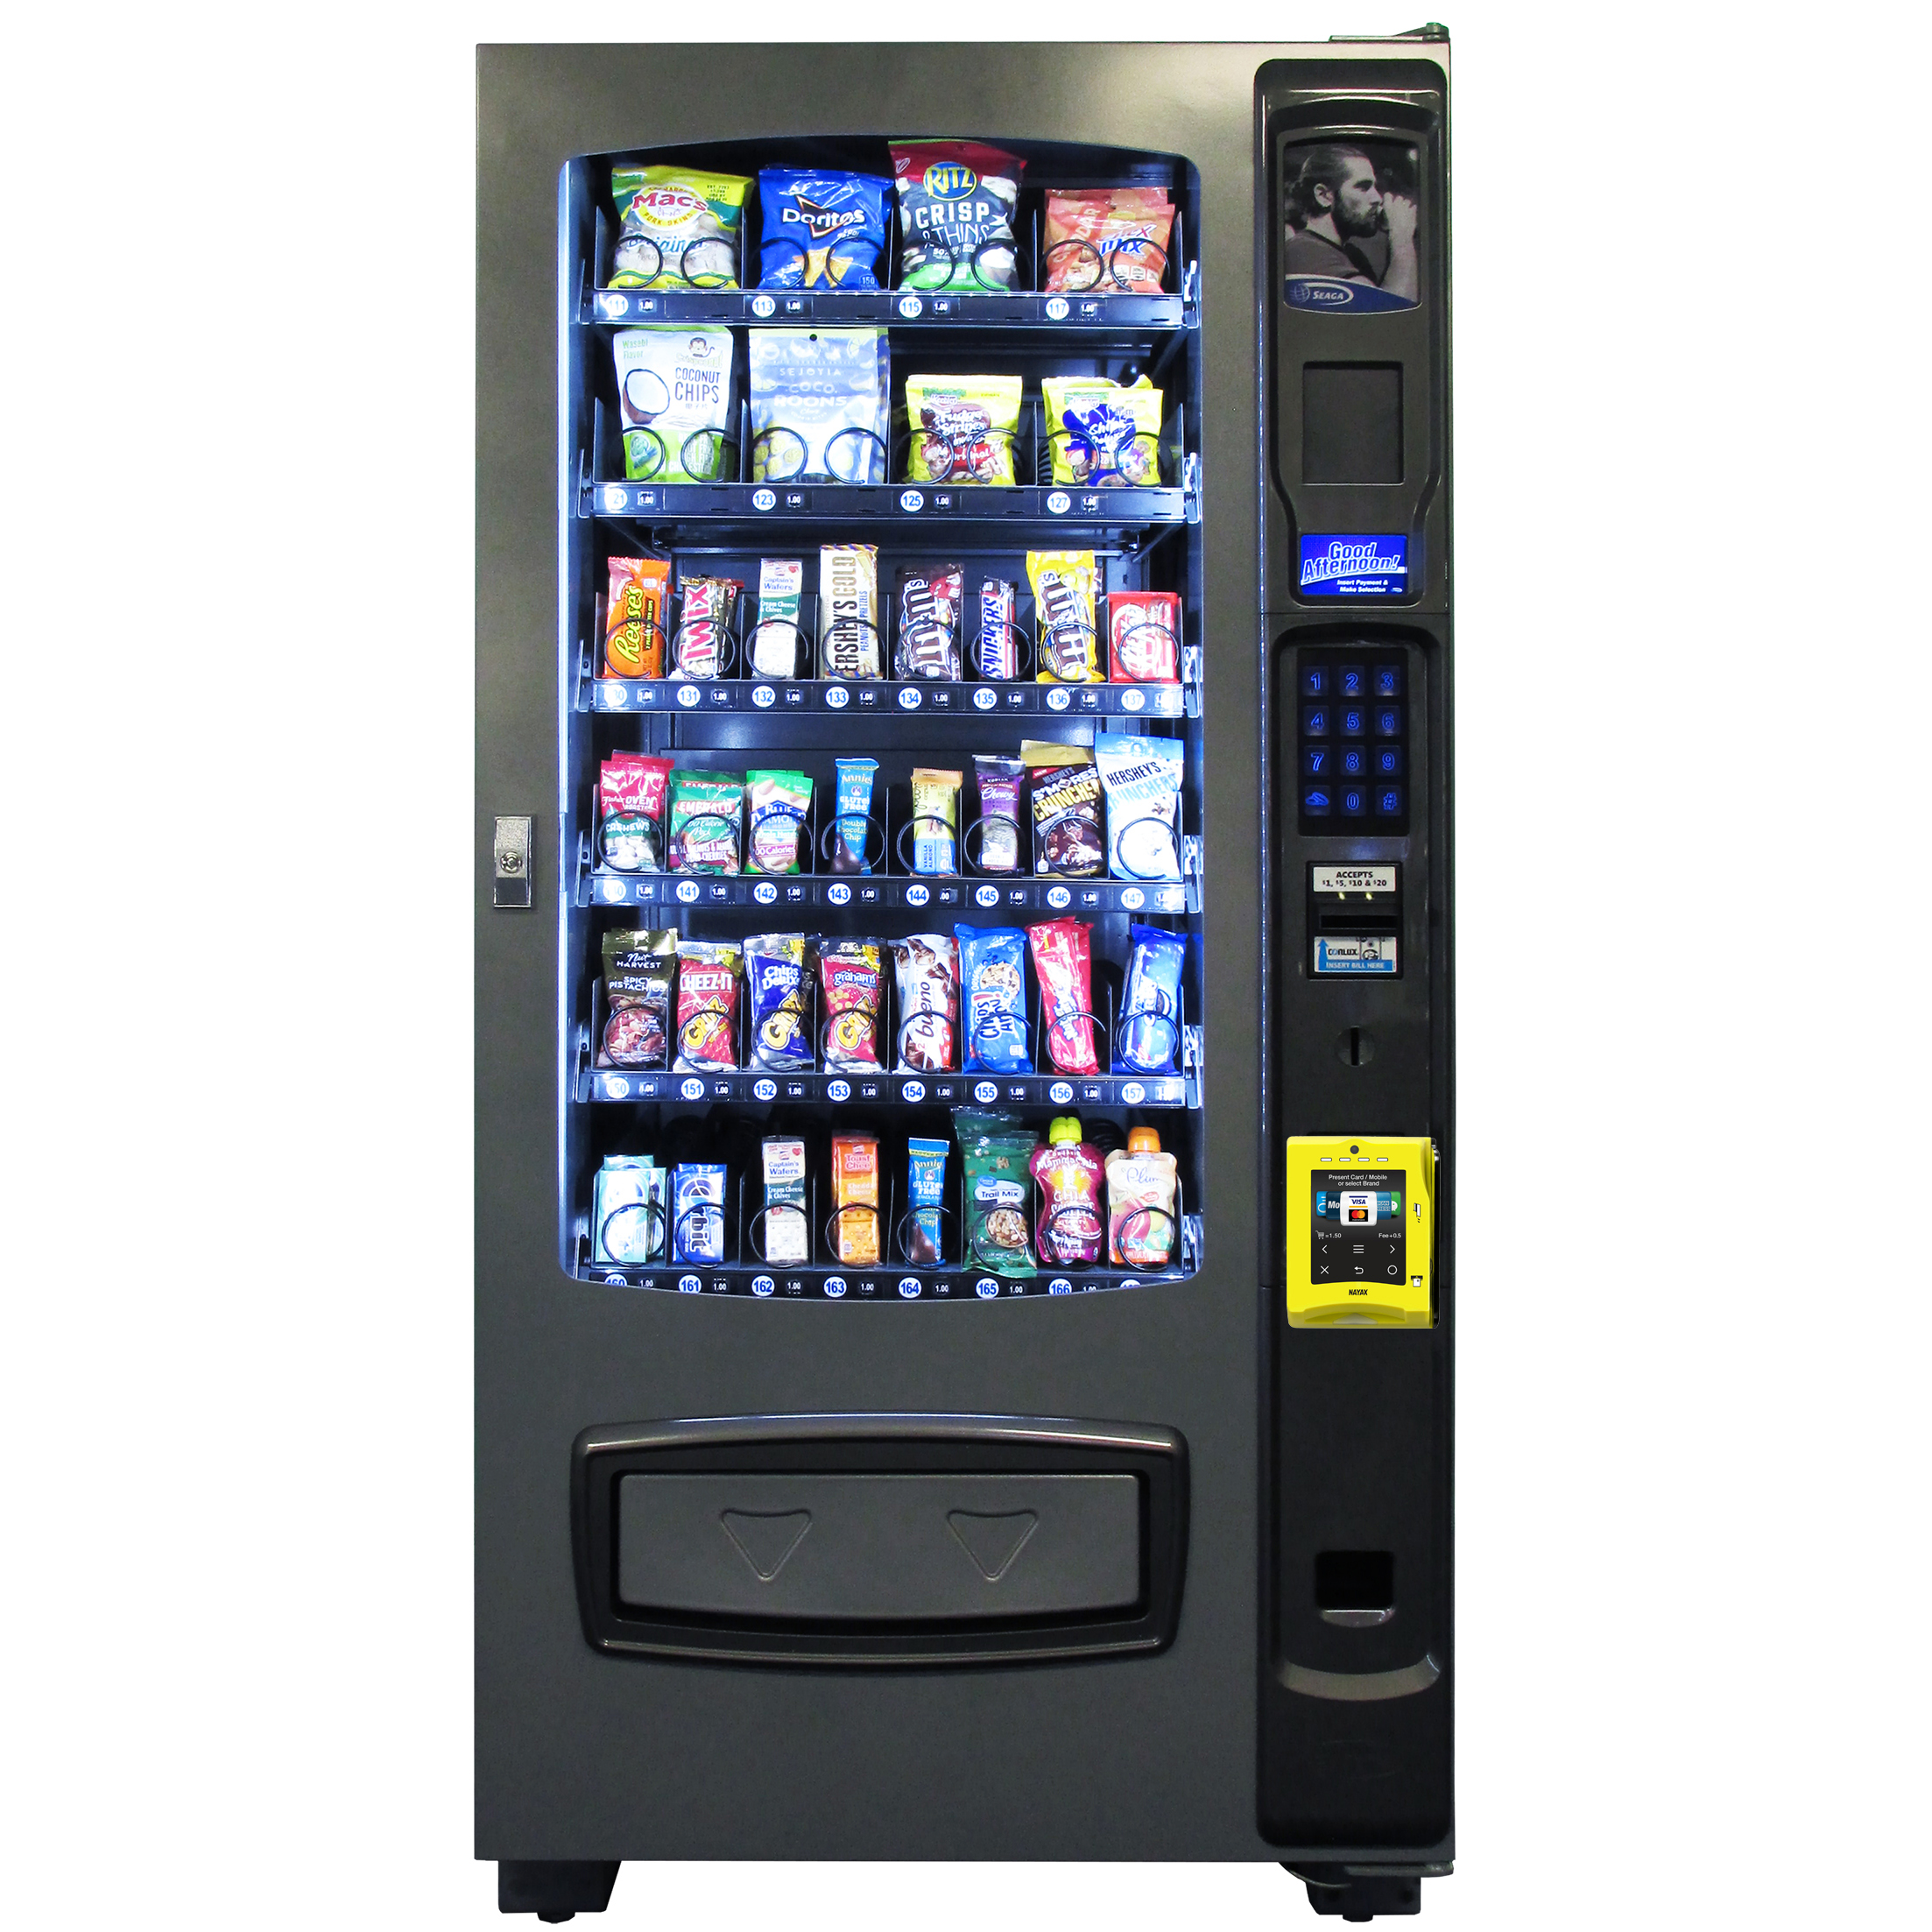 7 Sizes Snack Machine Labels Vending Create Your Own Prices Stickers 